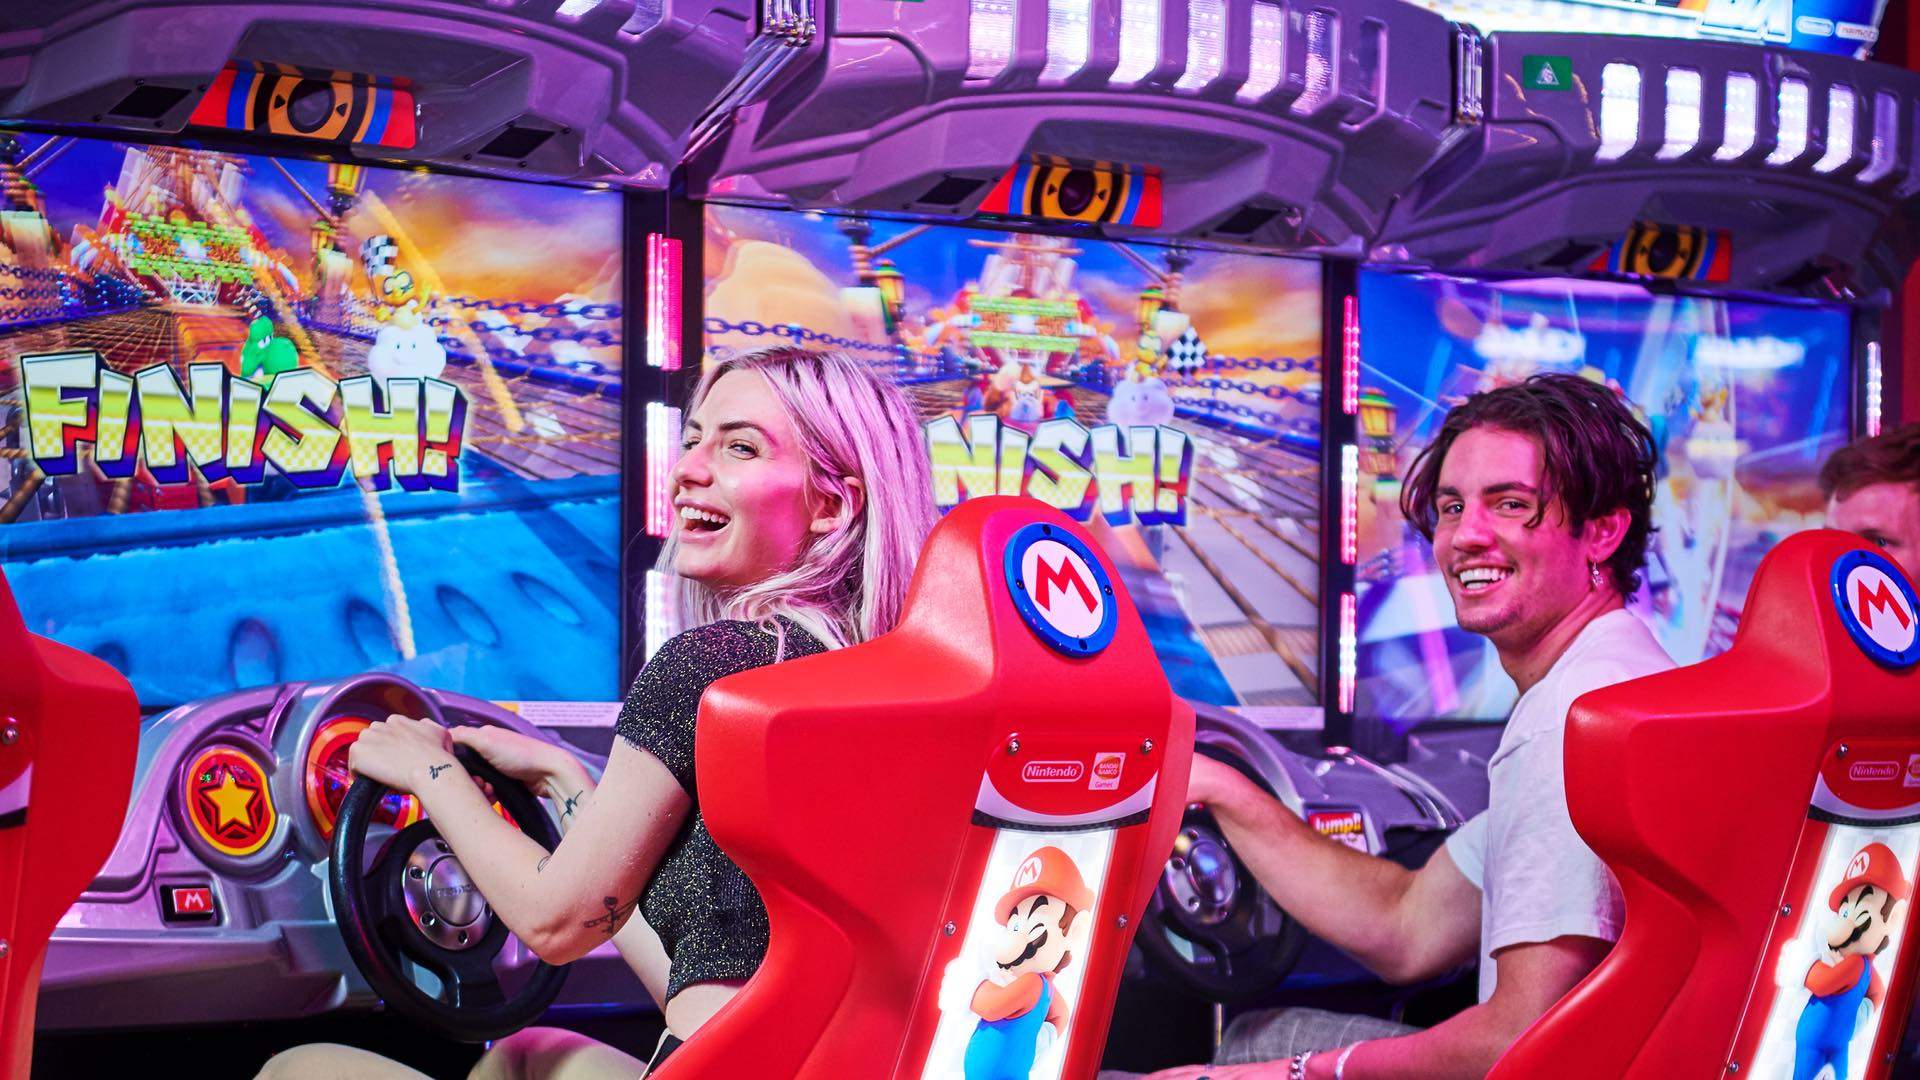 A Novelty Circus-Themed Arcade Bar by the Holey Moley Team Is Coming to Brisbane